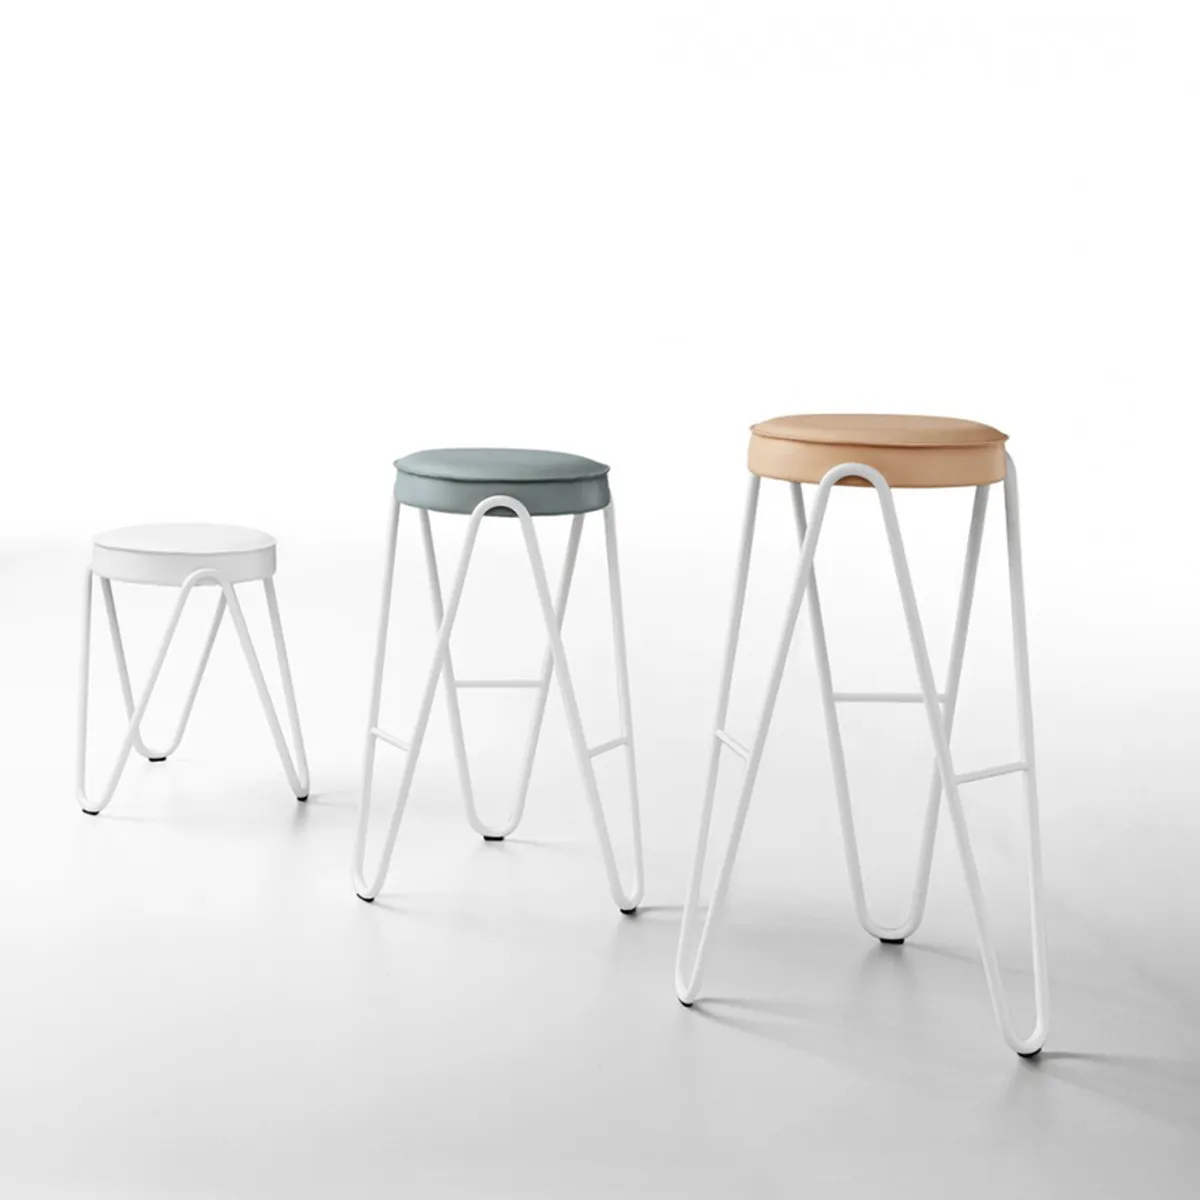 Apelle Leather Stools Inside Out Contracts 013